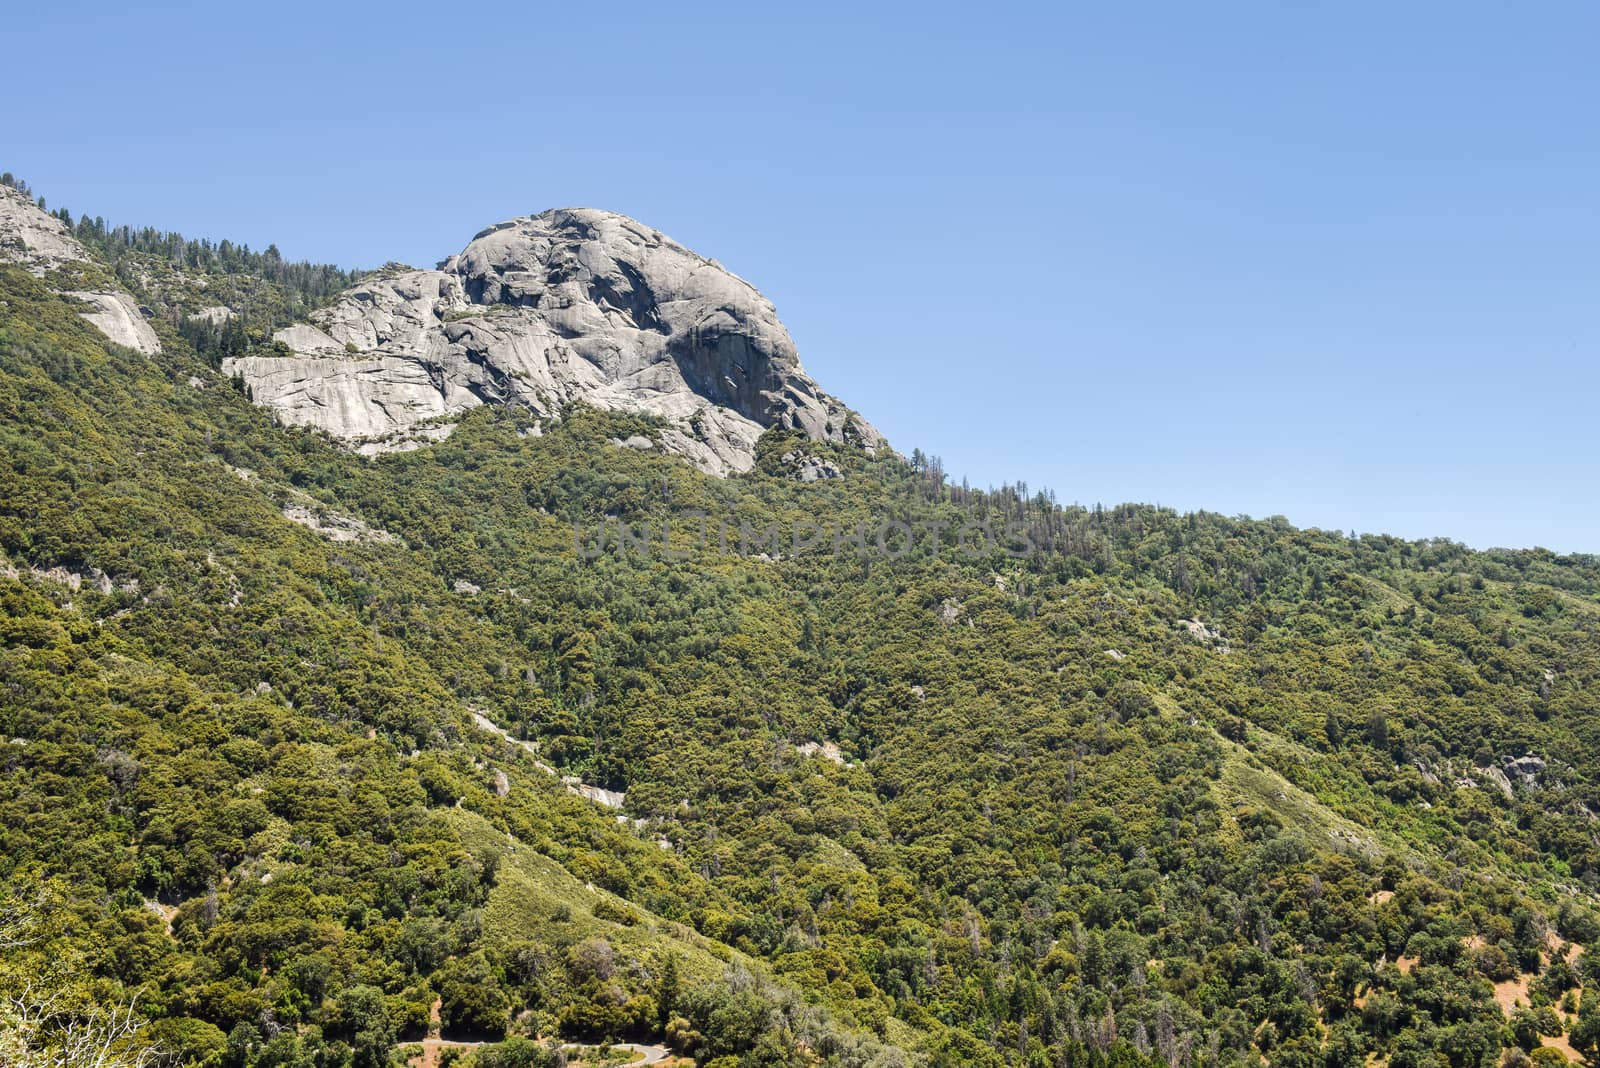 View of Moro Rock from the Generals Highway in Sequoia National Park, California by Njean